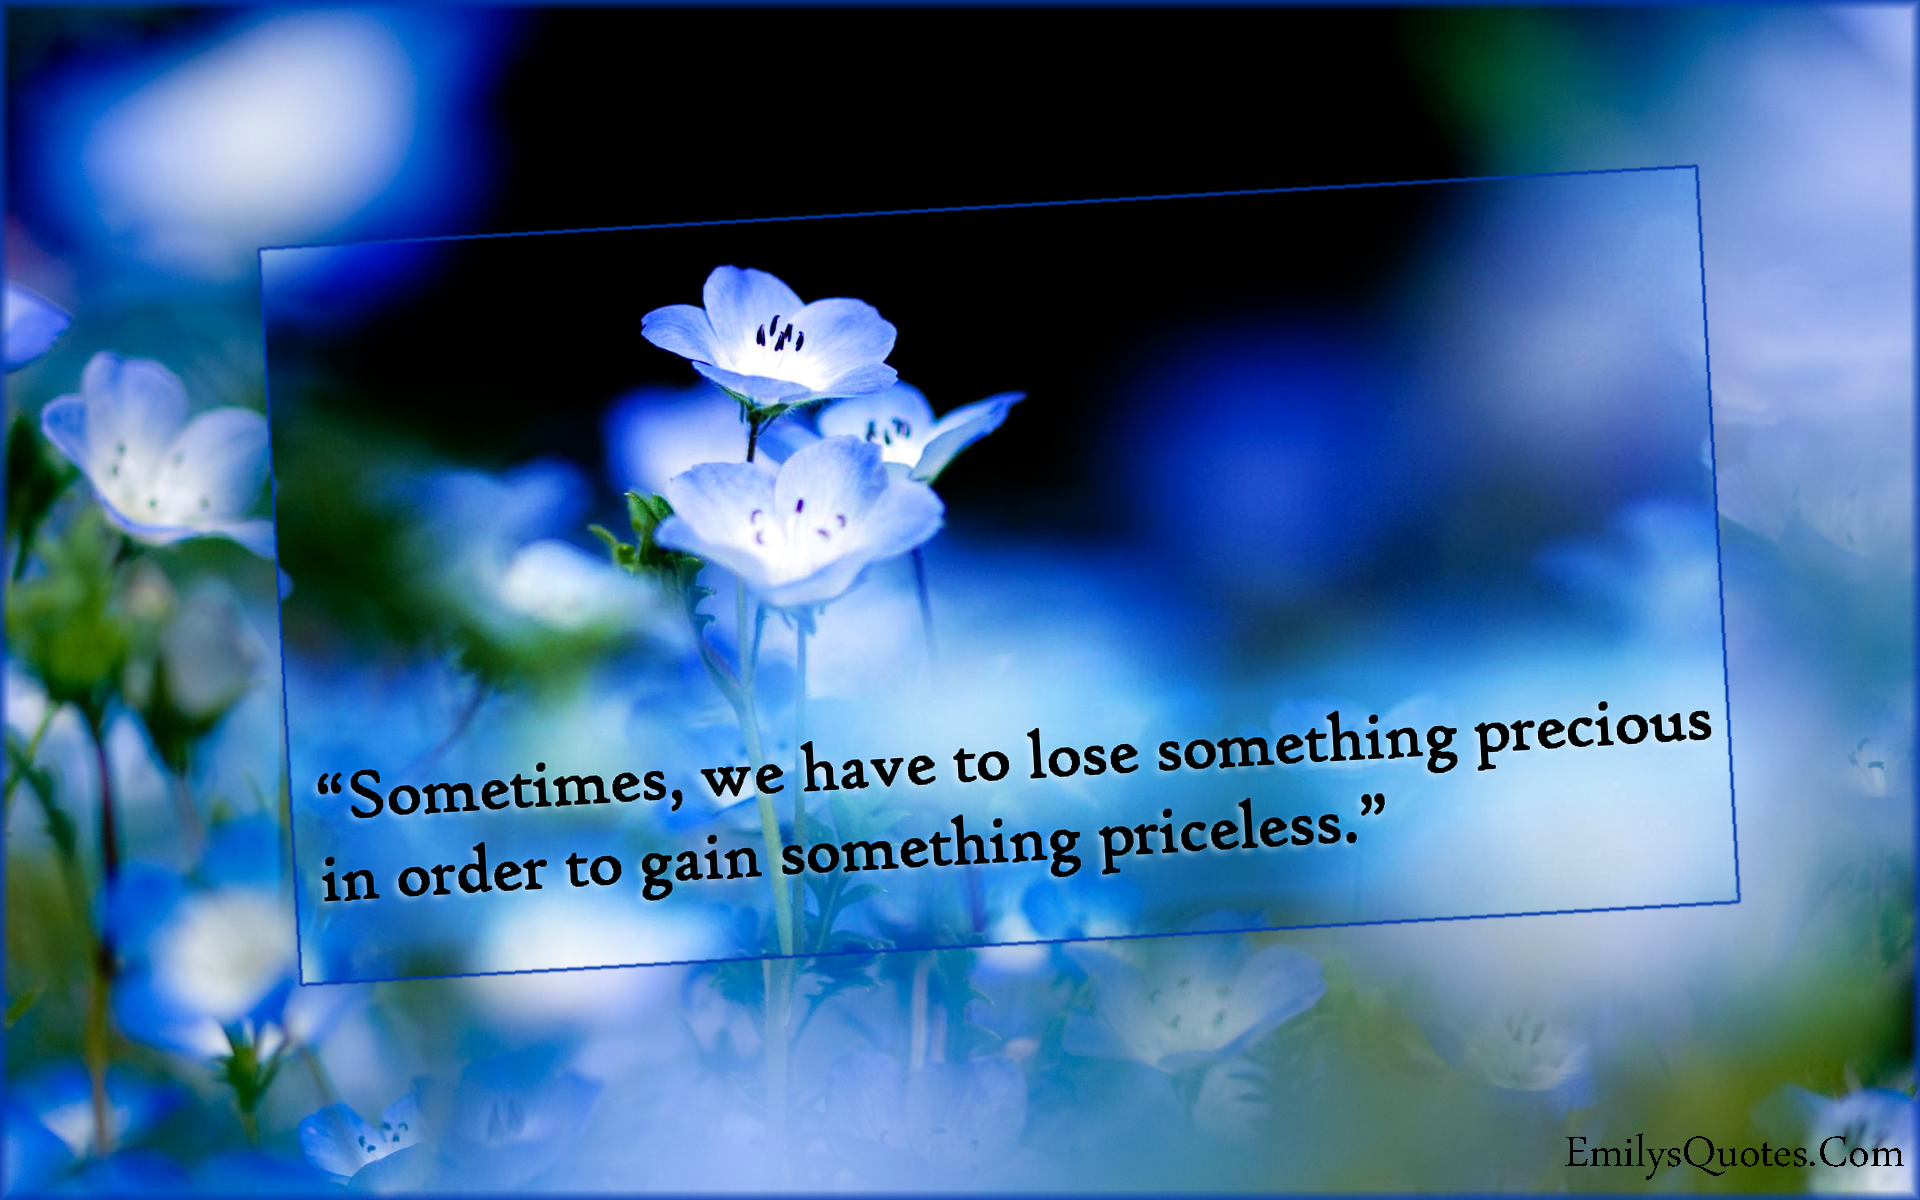 Sometimes, we have to lose something precious in order to gain something priceless